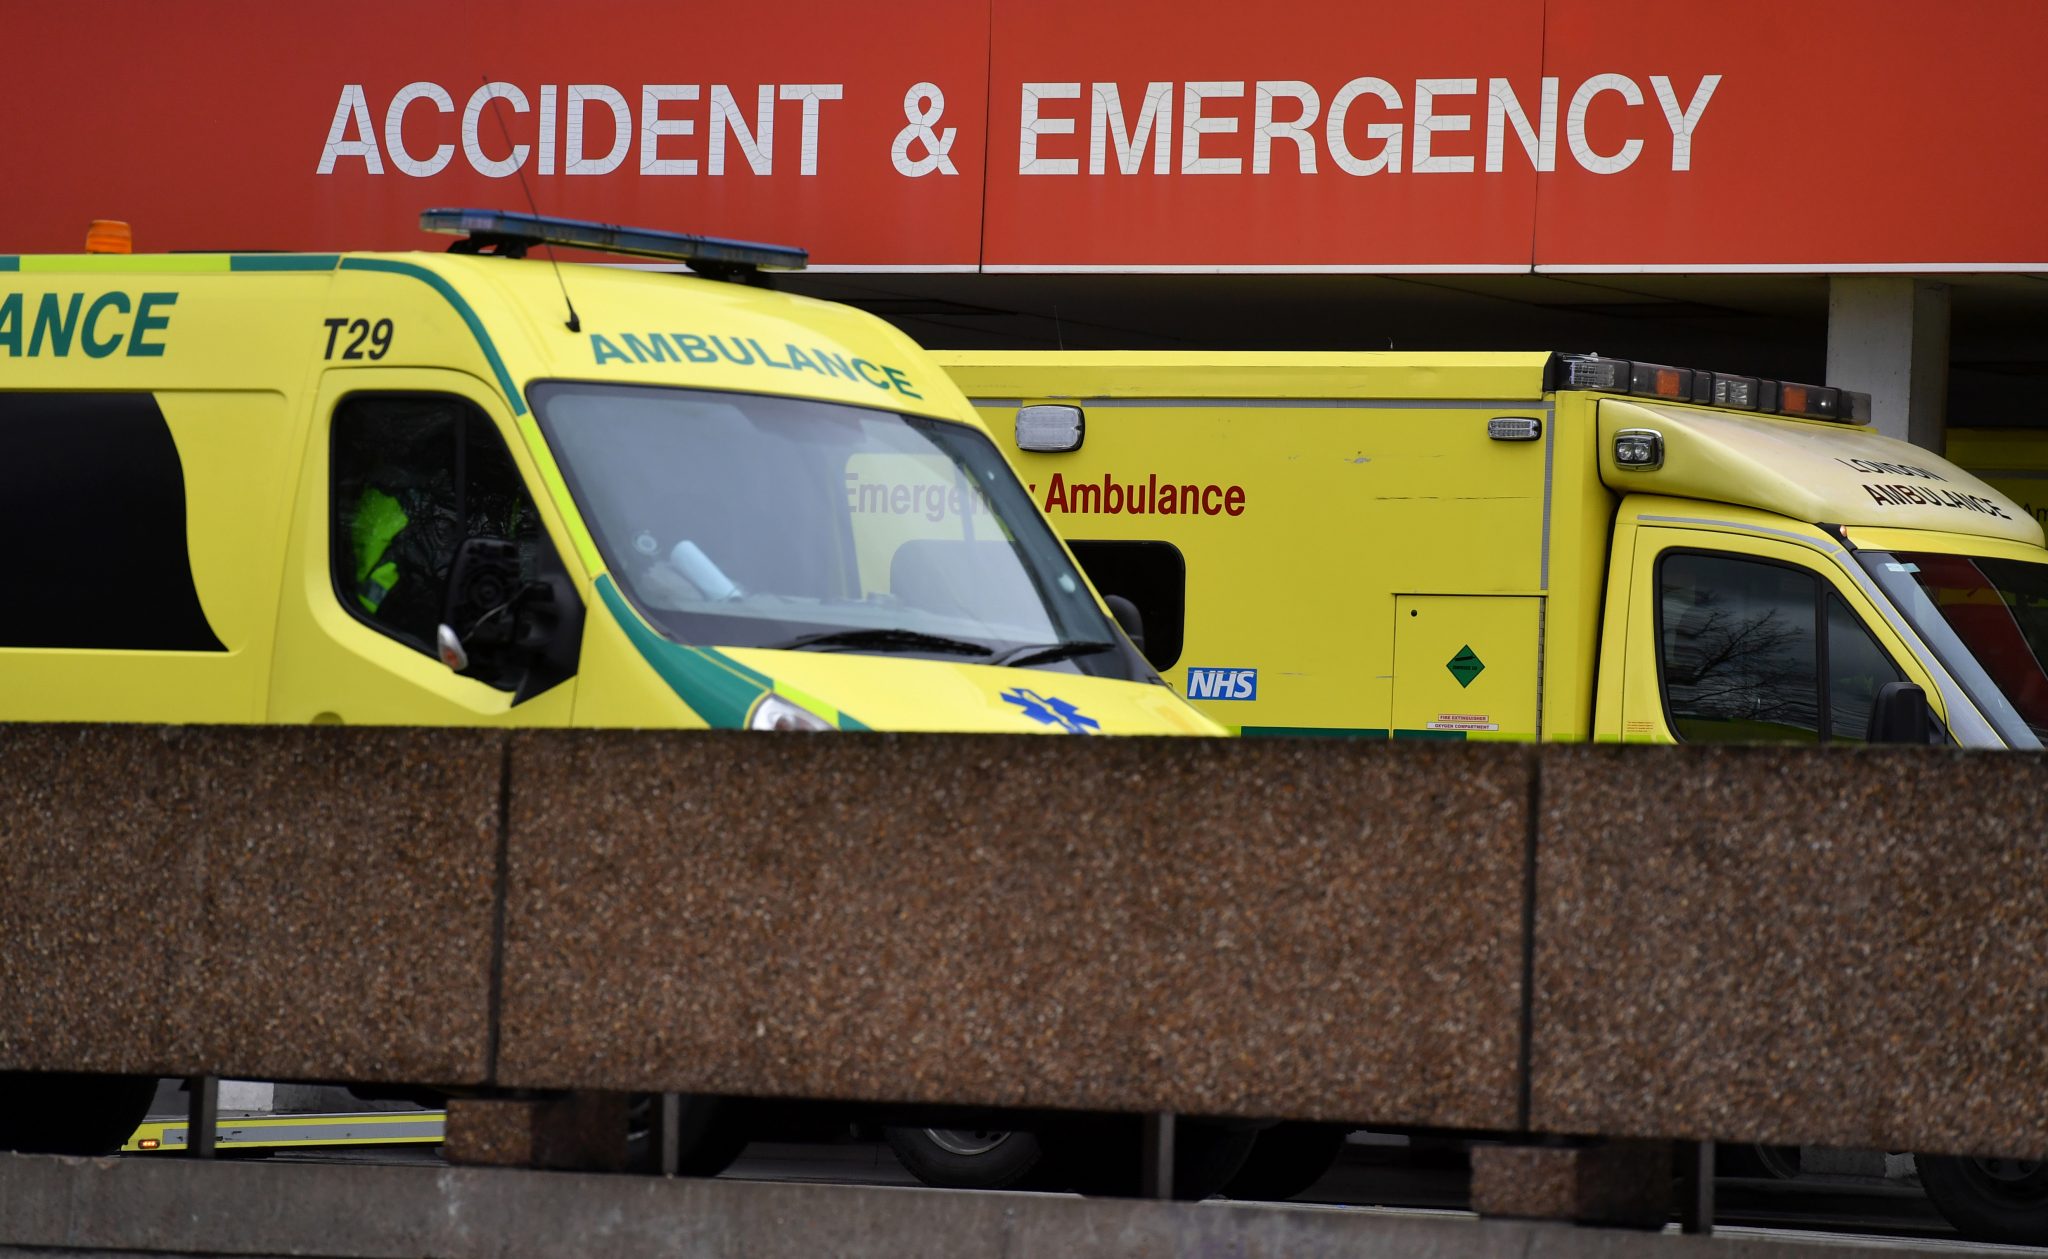 Ambulances are pictured outside the Accident & Emergency (A&E) department of St Thomas' Hospital in central London on March 8, 2017. Britain's economy will grow by 2.0 percent this year, sharply up on a previous forecast of 1.4 percent, finance minister Philip Hammond said Wednesday in his budget statement. Hammond also announced a two billion pound increase in spending for social care, over the next three years, in an effort to tackle pressure on the NHS. / AFP PHOTO / BEN STANSALL